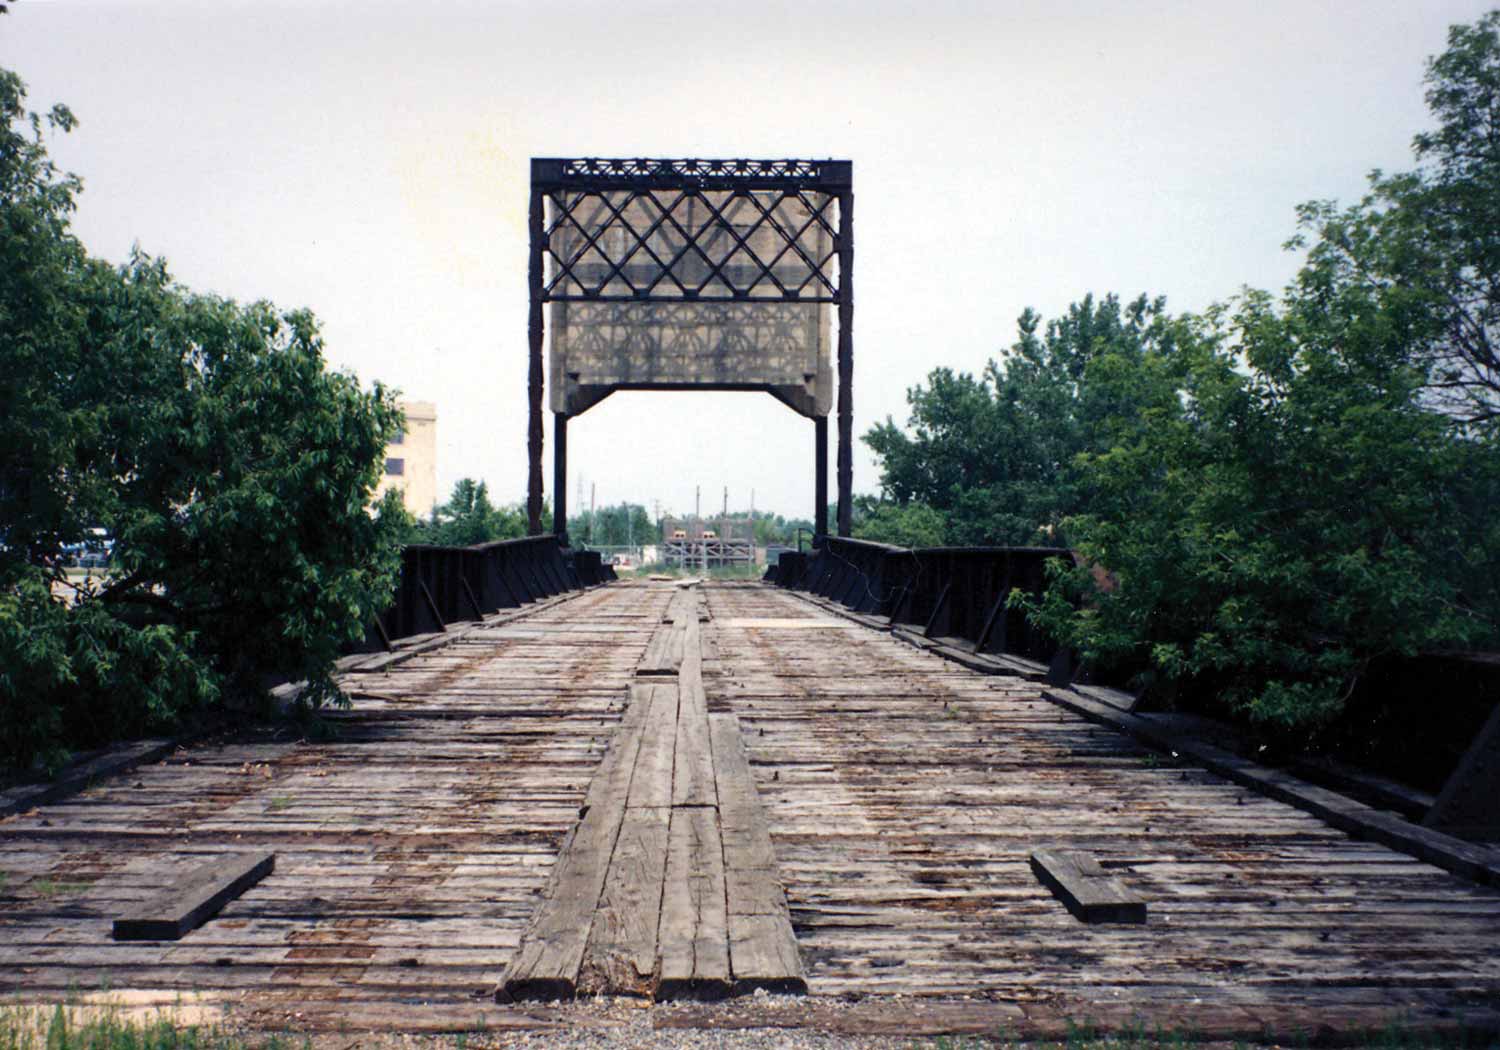 The Rail Bridge in 1994, showing weathered wooden planks.